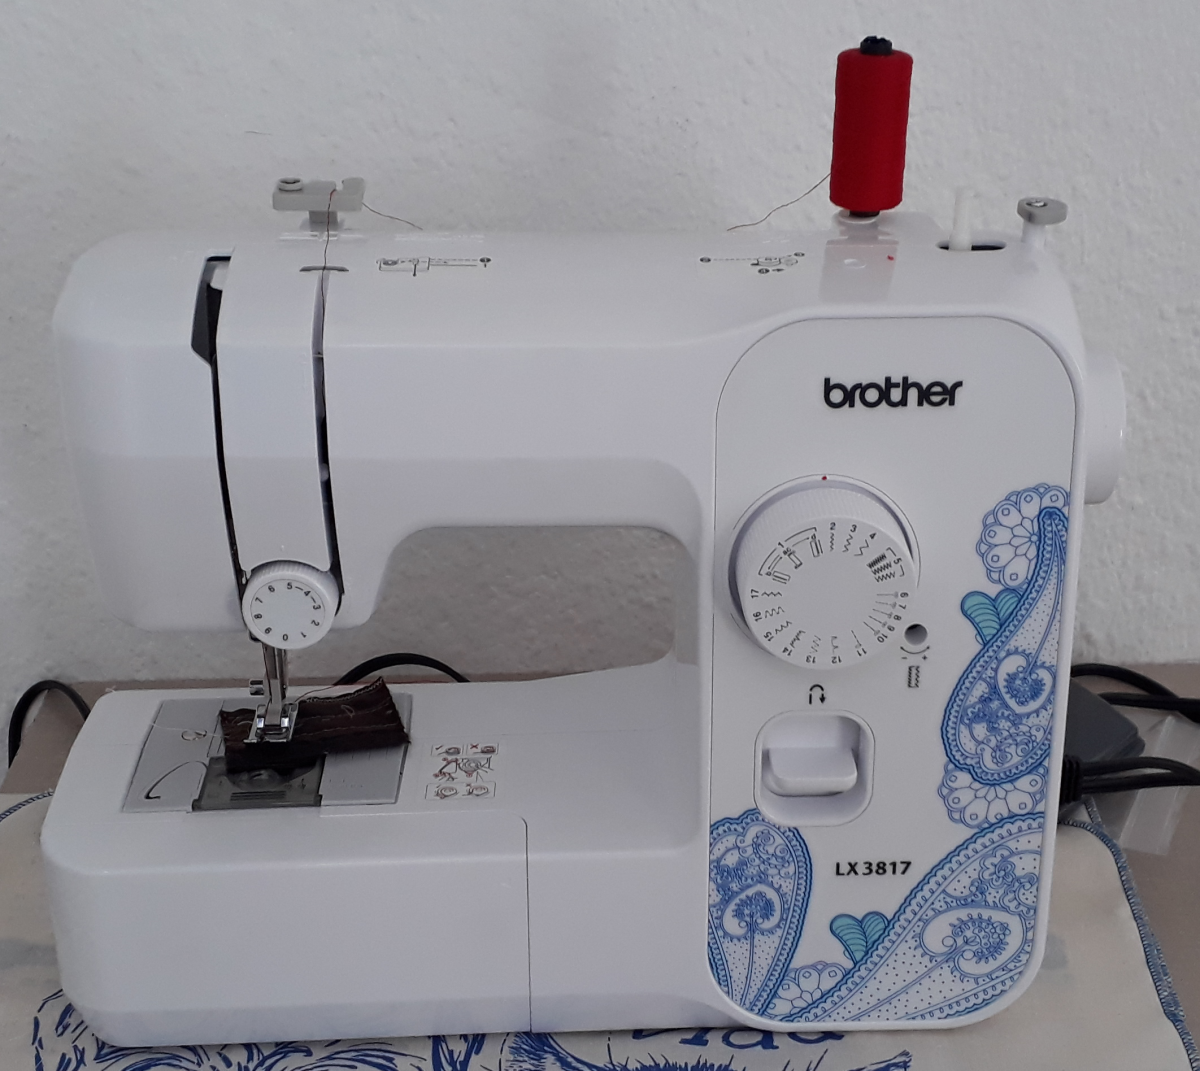 Brother Lx3817 Sewing Machine: A Good Choice for 2022 - FeltMagnet